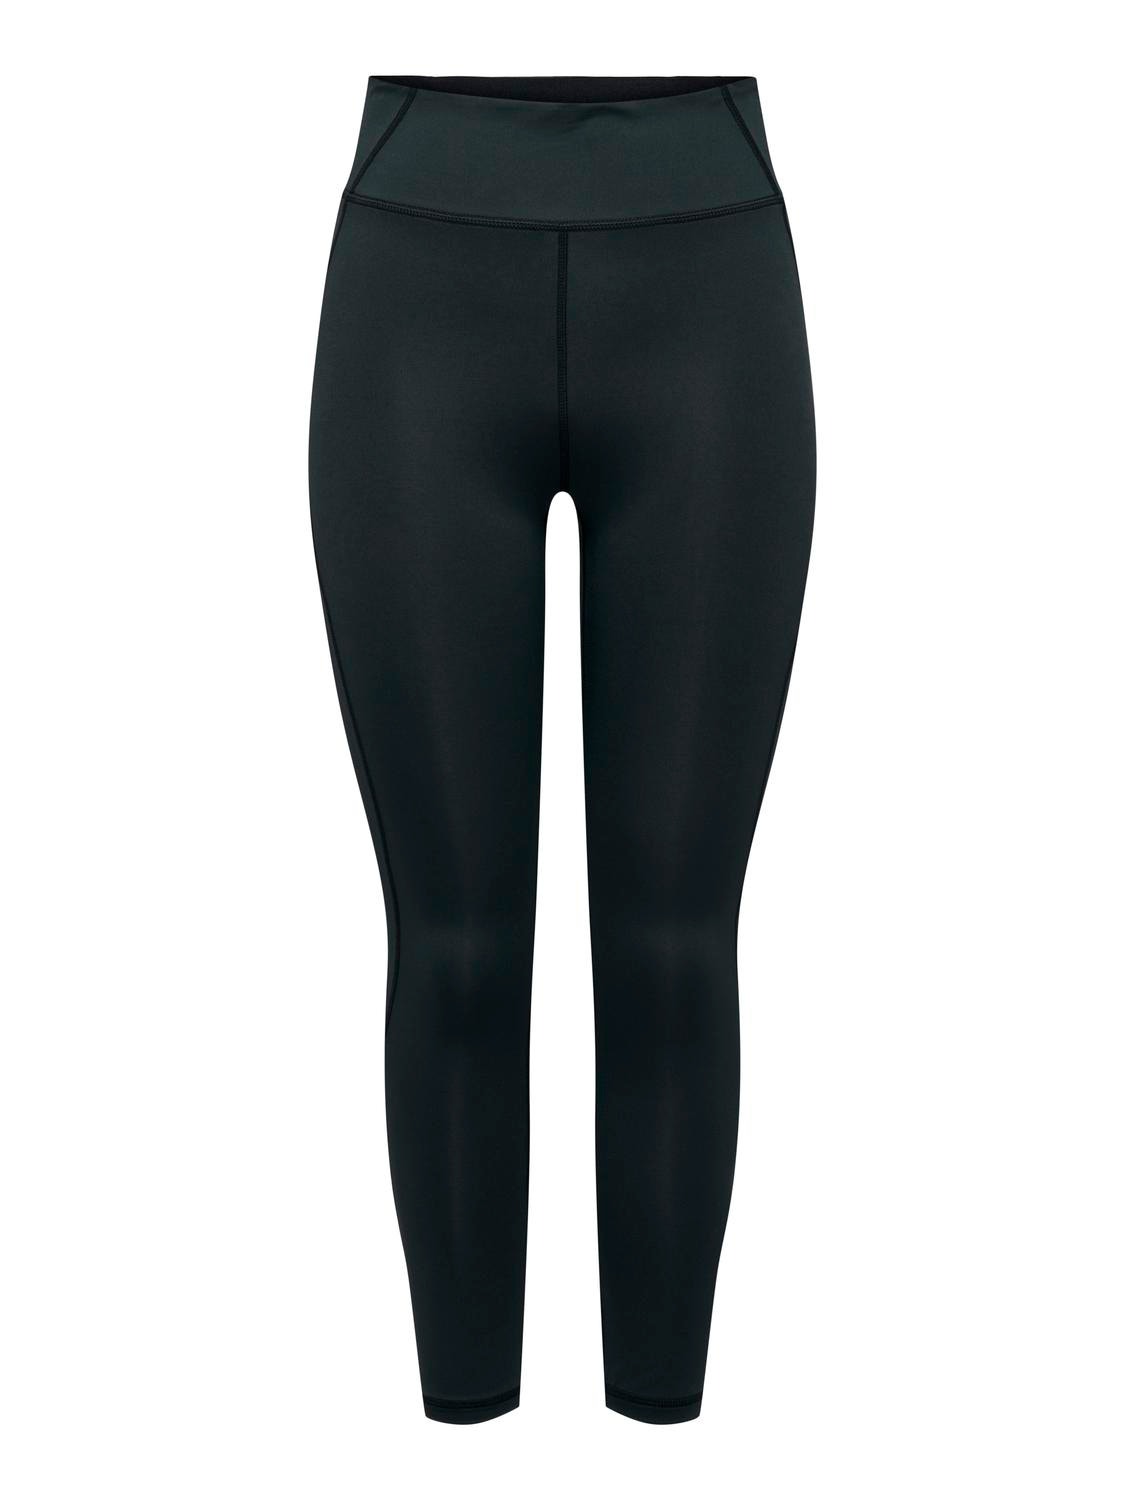 ONLY Tight fit High waist Legging -Black - 15287753